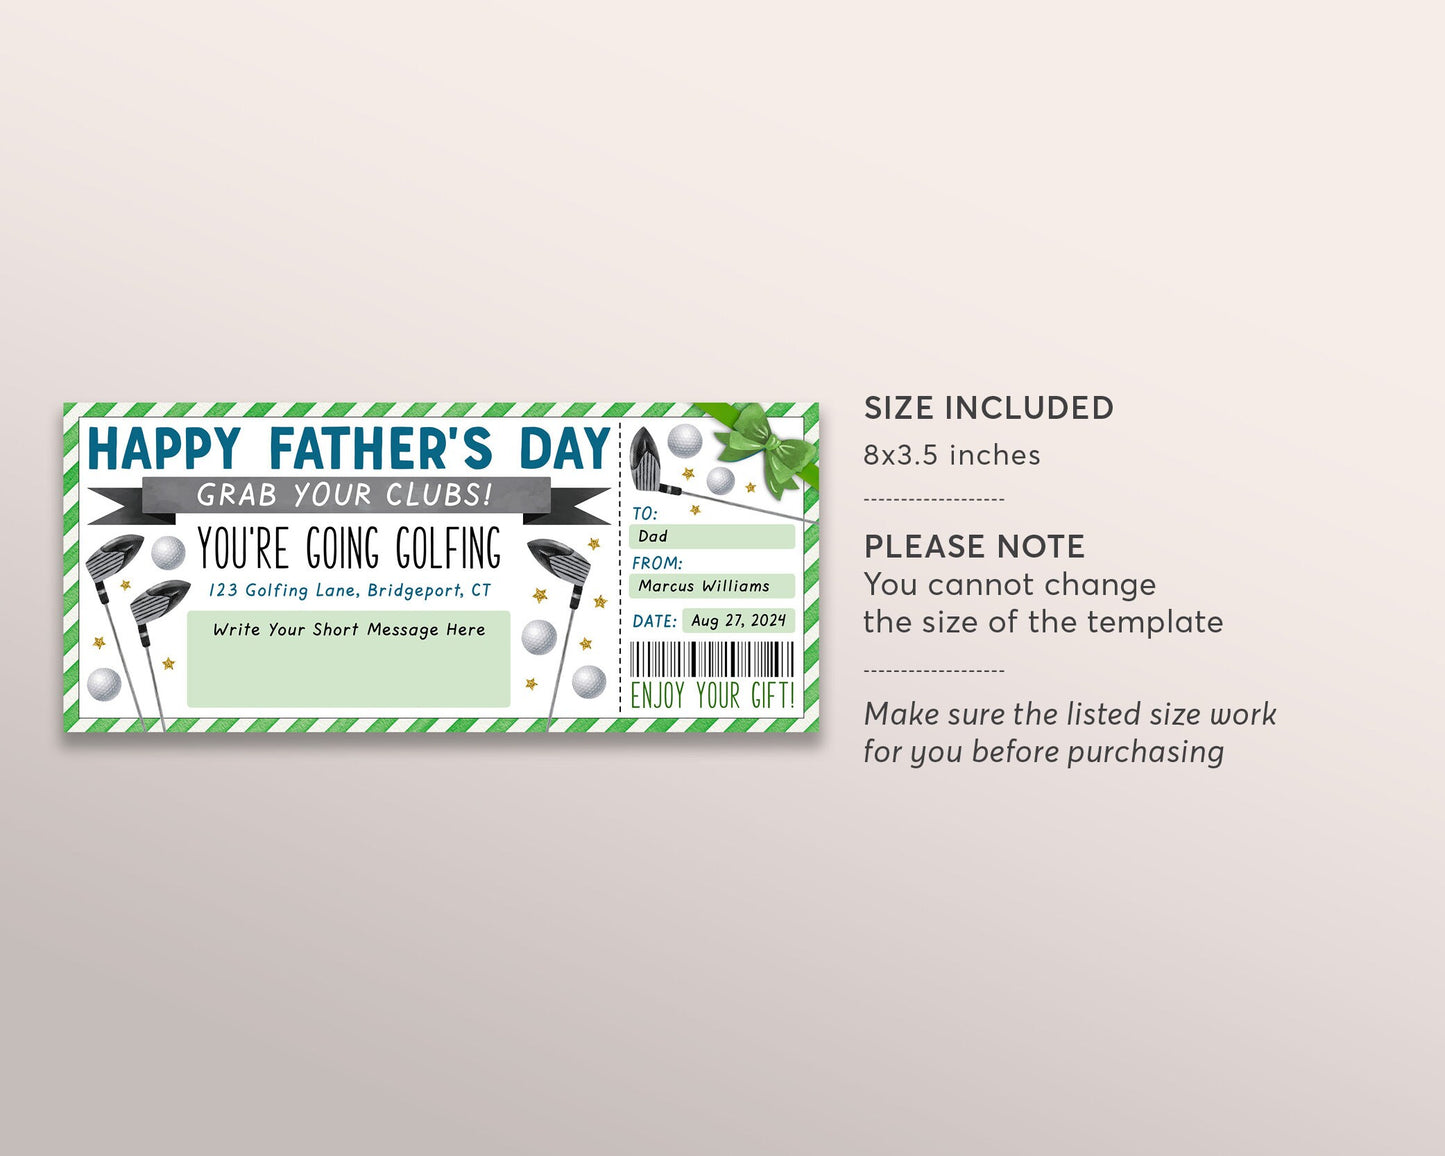 Fathers Day Golf Trip Gift Ticket Editable Template, Surprise Golfing Game Voucher For Dad Husband, Sports Gift Certificate, Golf Tournament